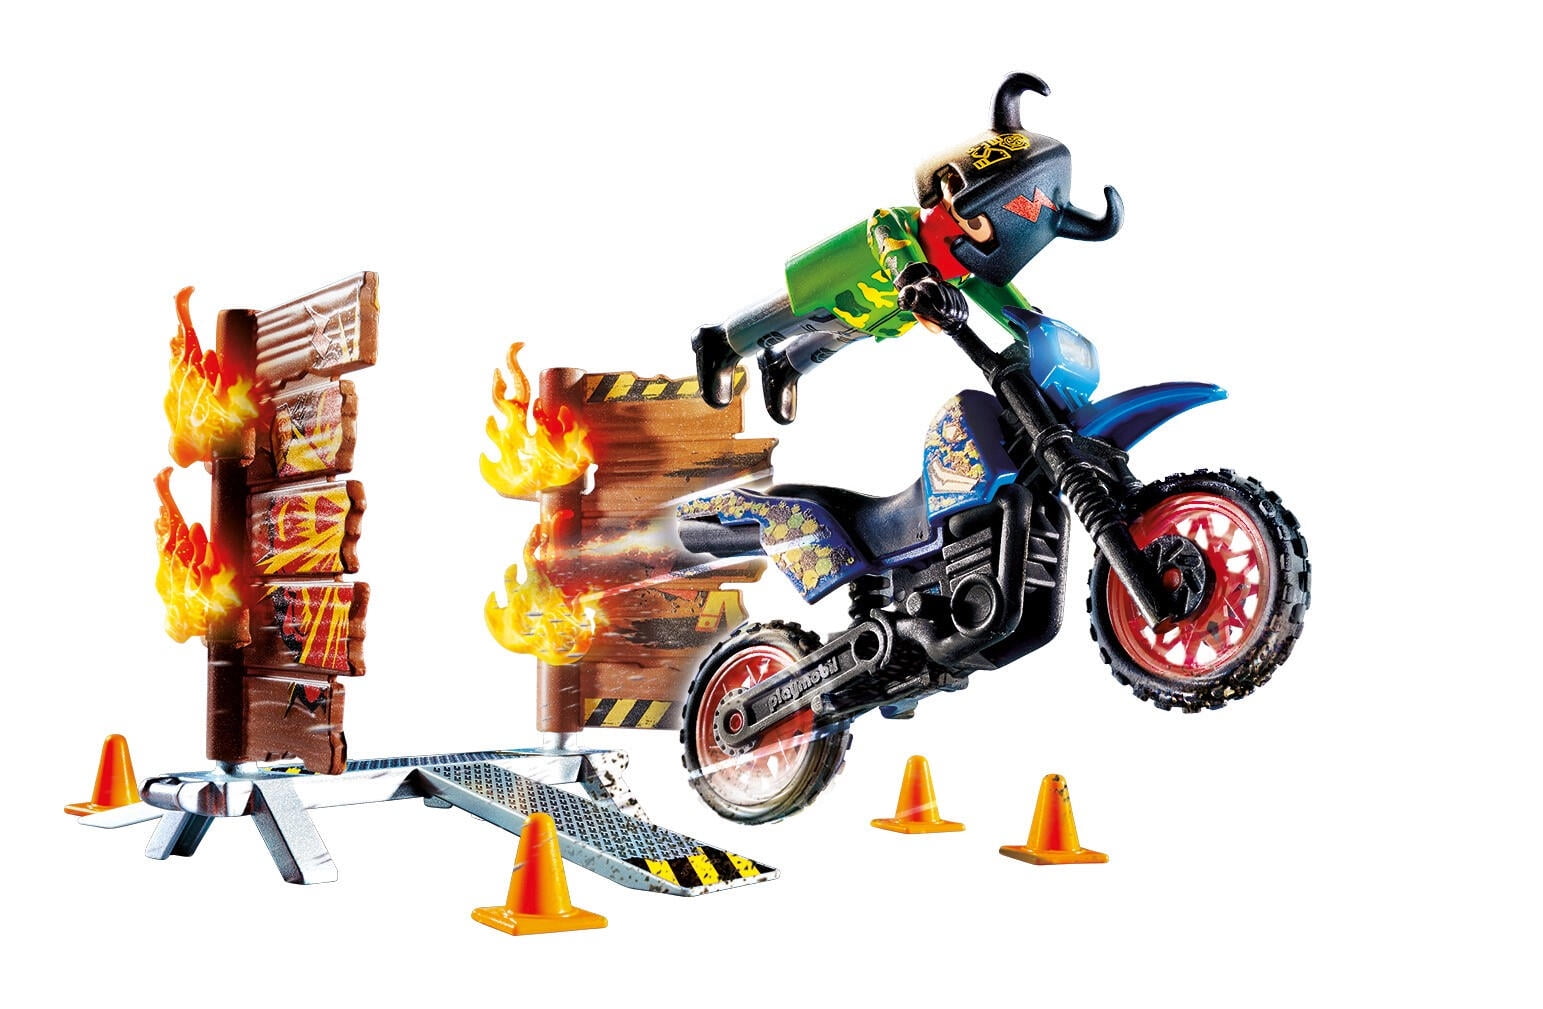 Playmobil Stunt Show Motocross with Fiery Wall $9.93 (Reg. $17) - LOWEST  PRICE - Fabulessly Frugal